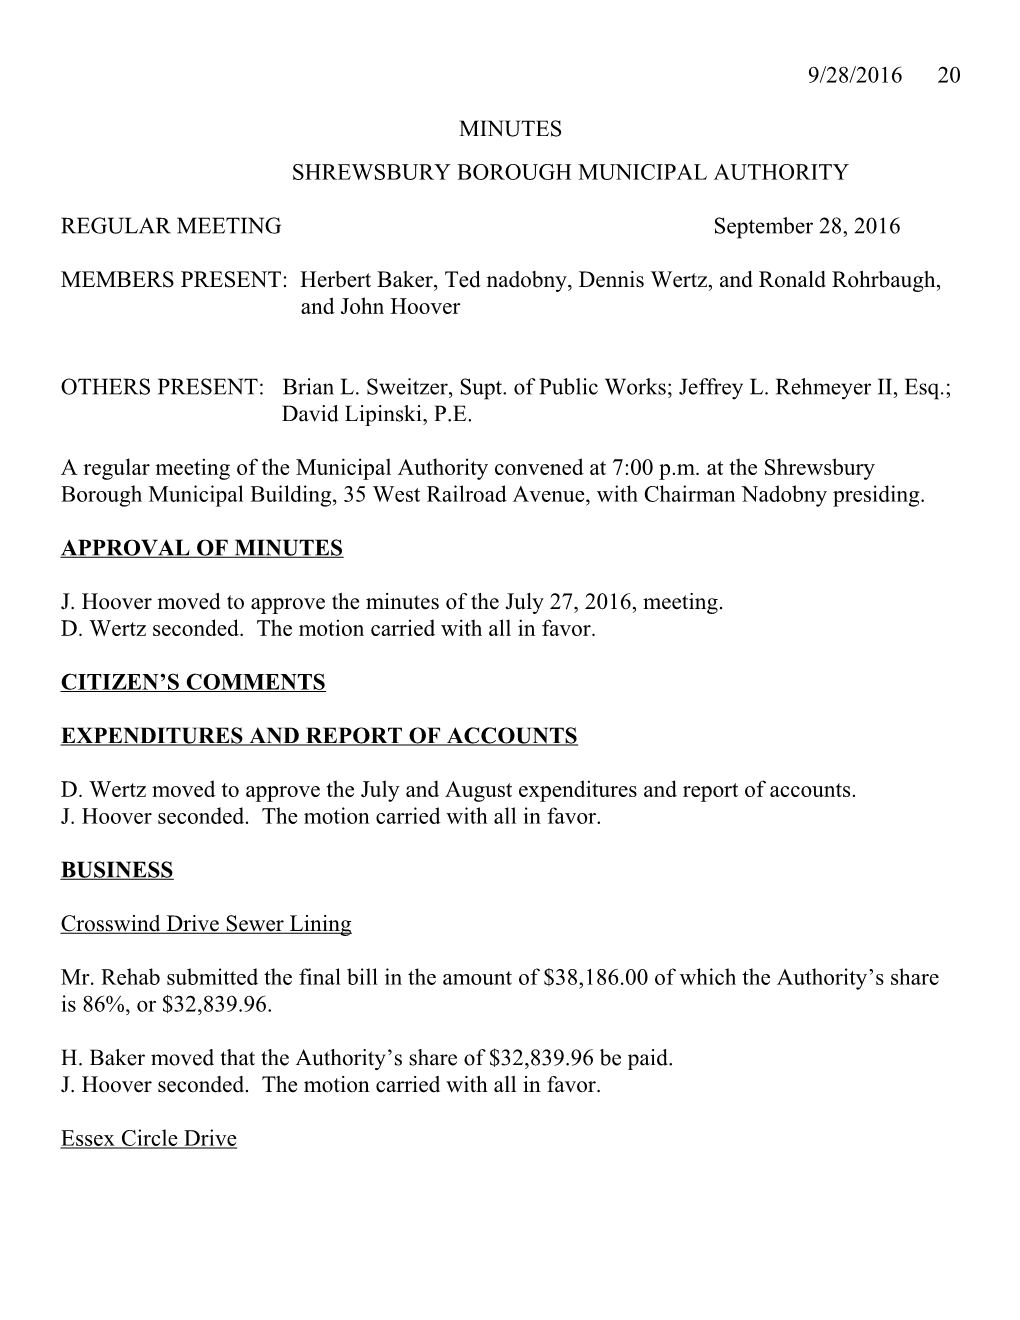 December Authority Meeting Minutes (01075759:1)